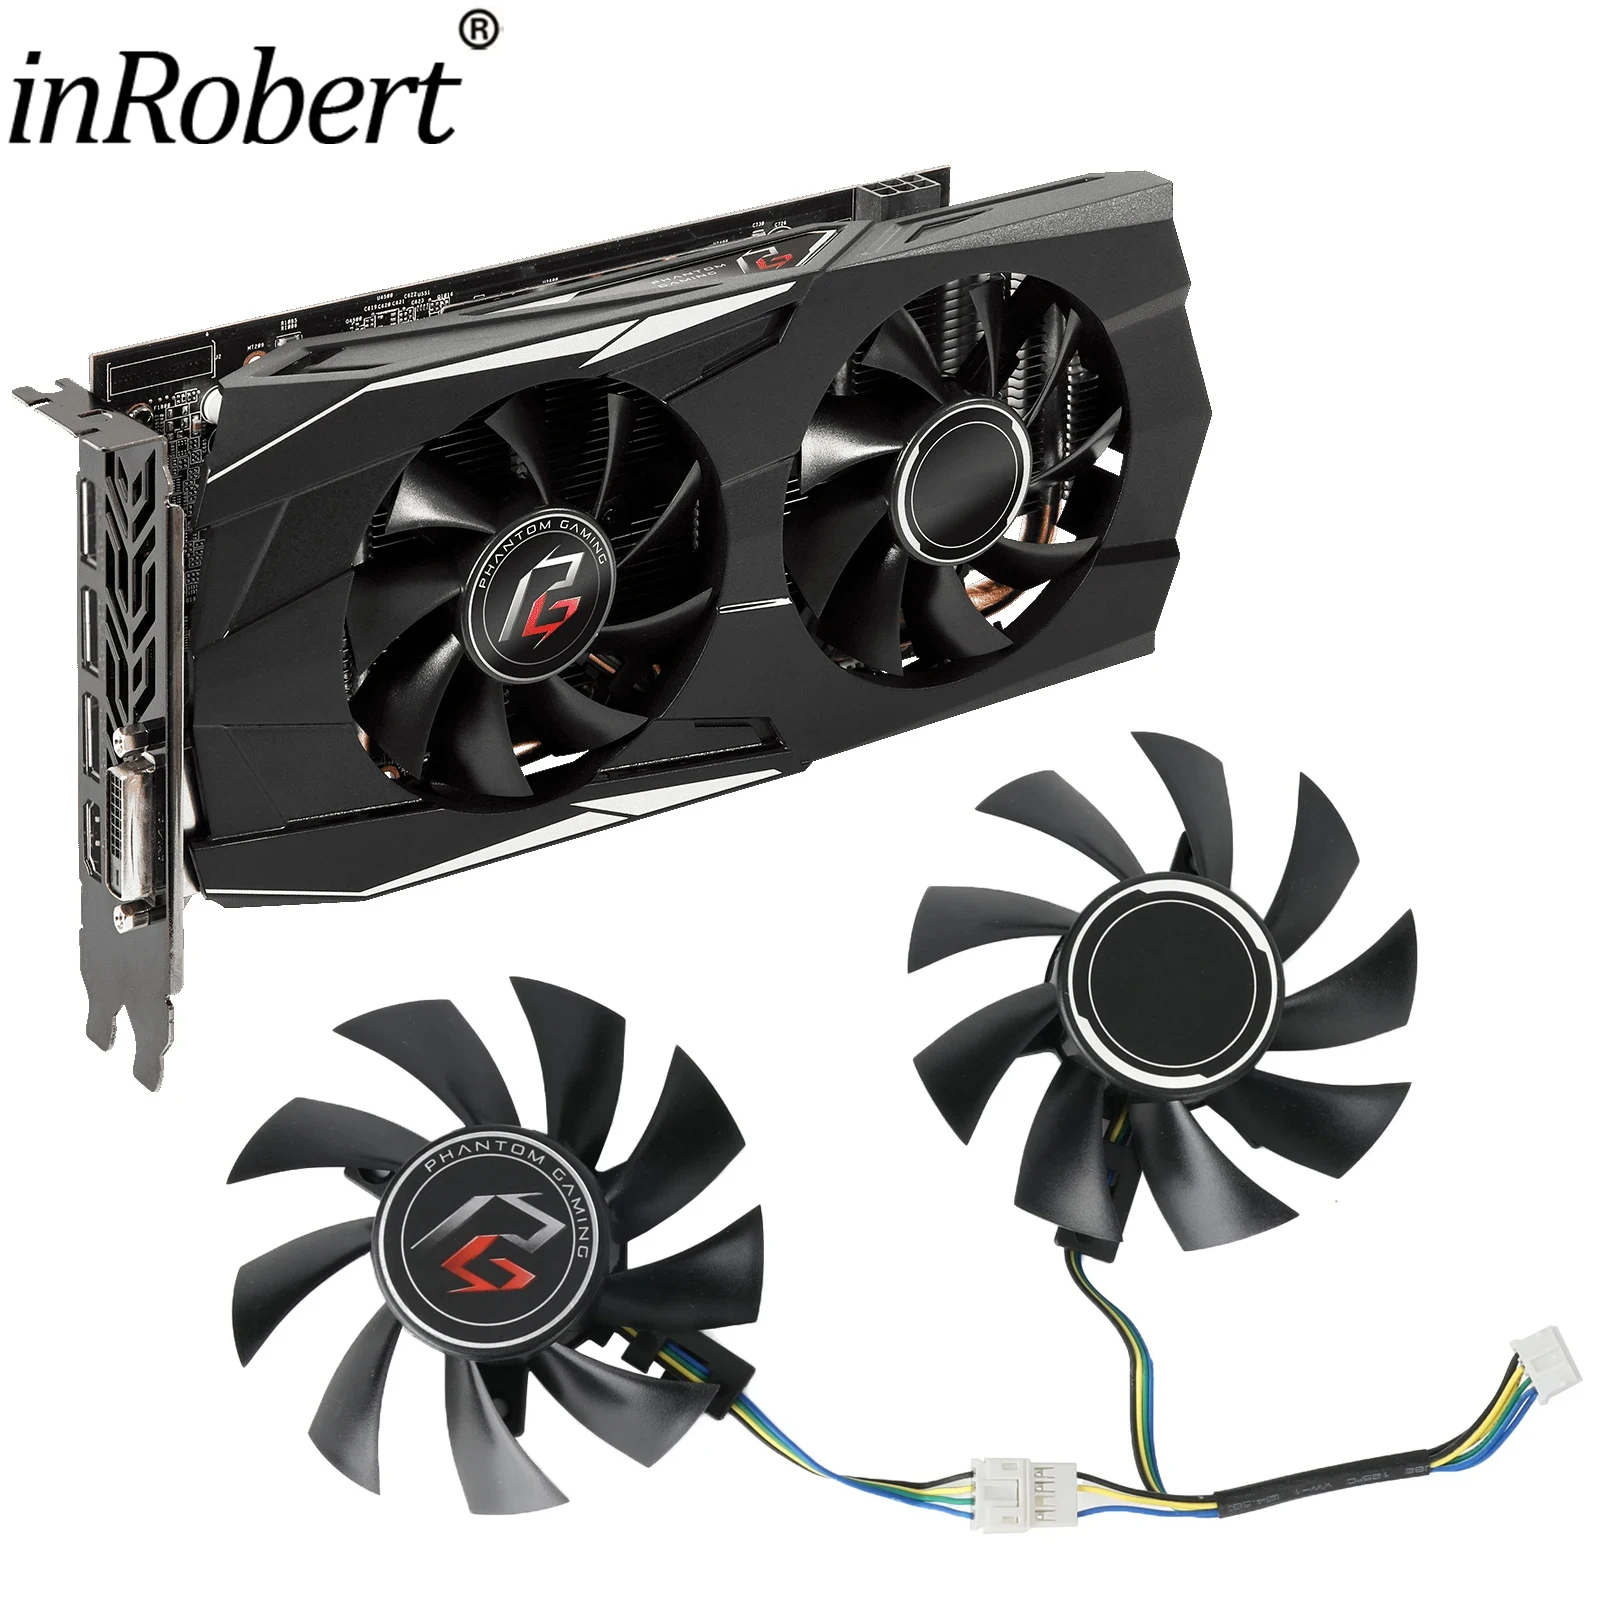 75mm FD8015U12D 4Pin RX580 RX570 Video Card Fan Replacement For ASrock RX 570 580 Phantom Gaming Graphics Card Cooler with Case